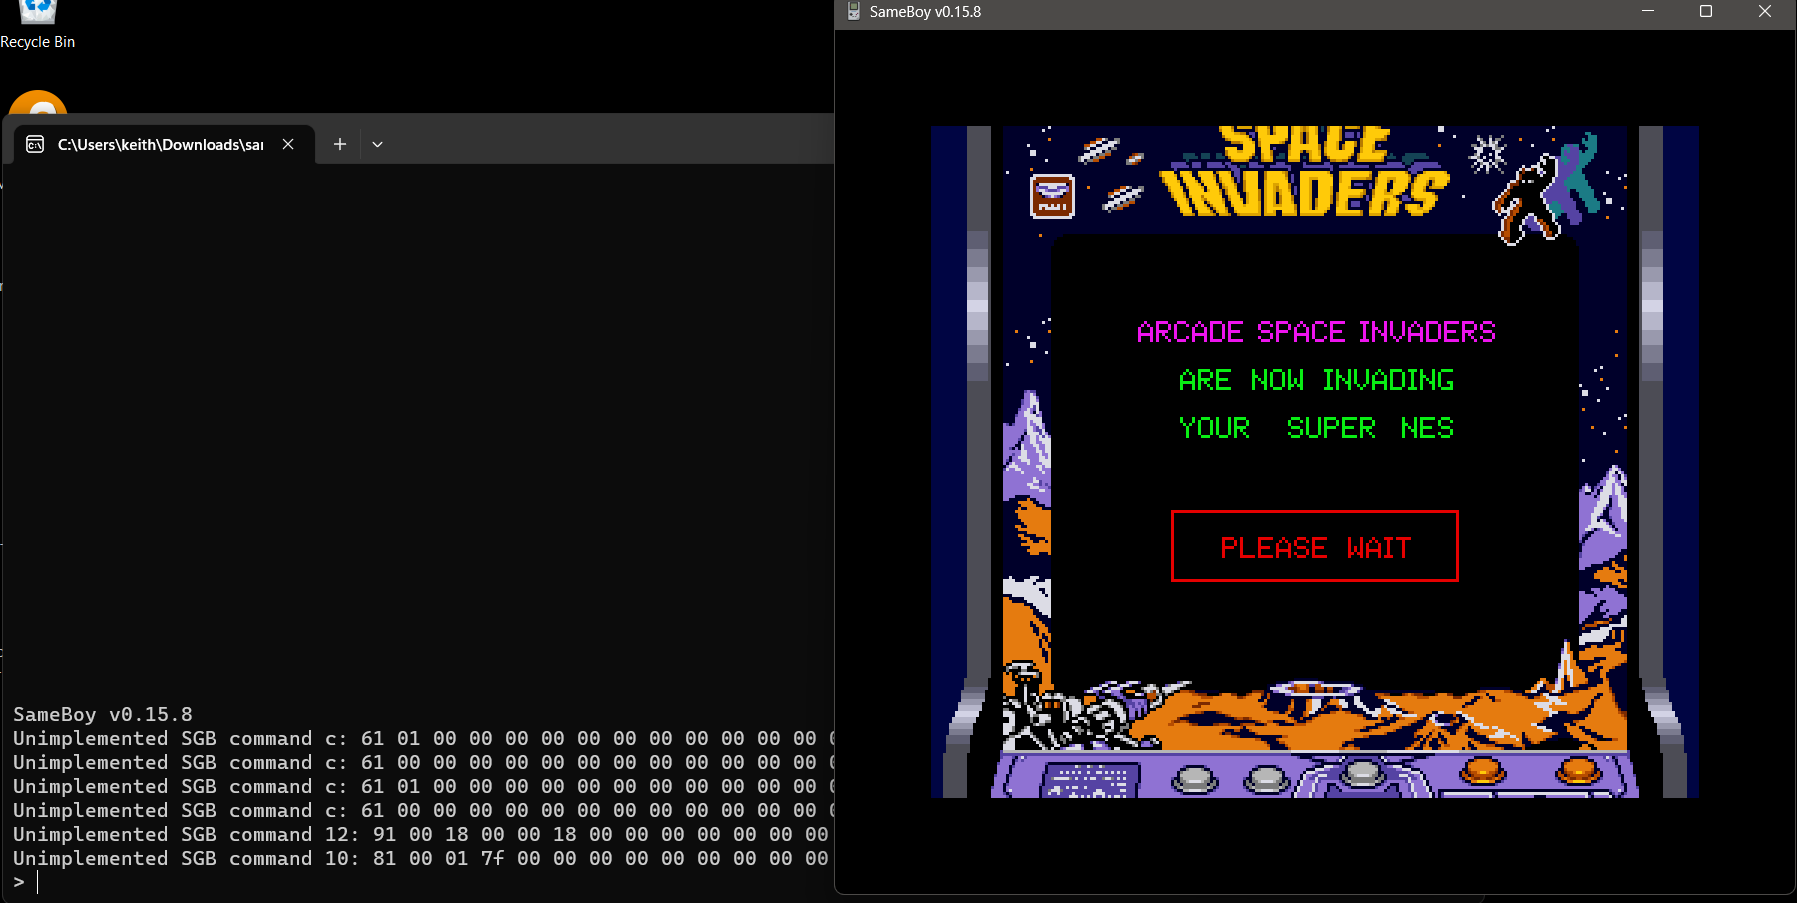 Attempting to load Arcade Space Invaders on the SameBoy Game Boy emulator